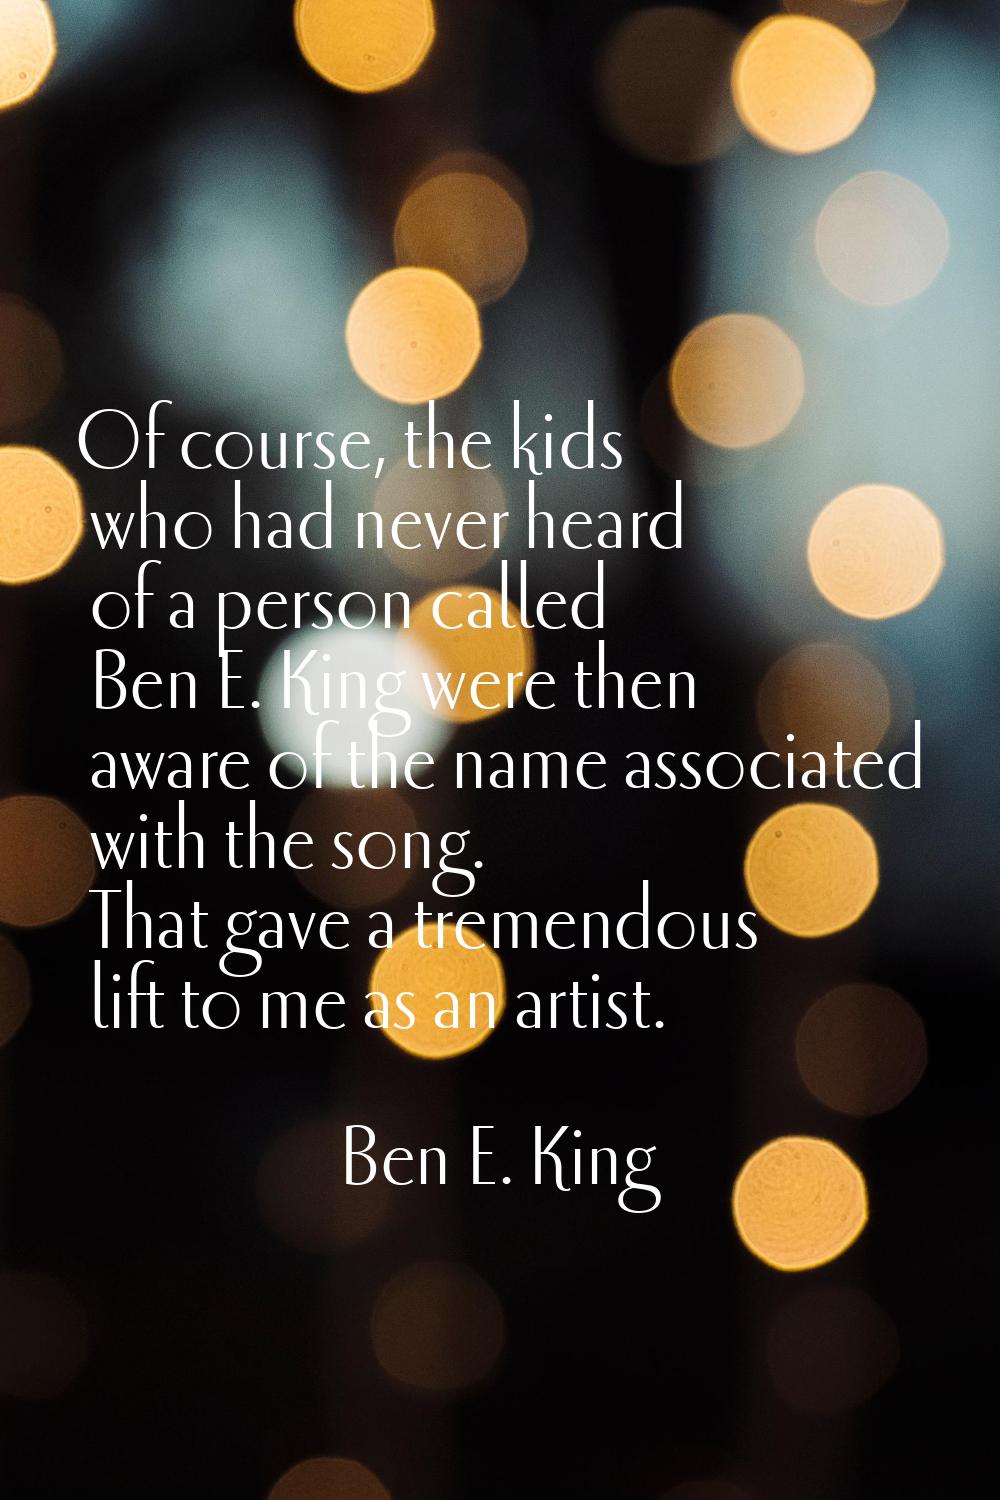 Of course, the kids who had never heard of a person called Ben E. King were then aware of the name 